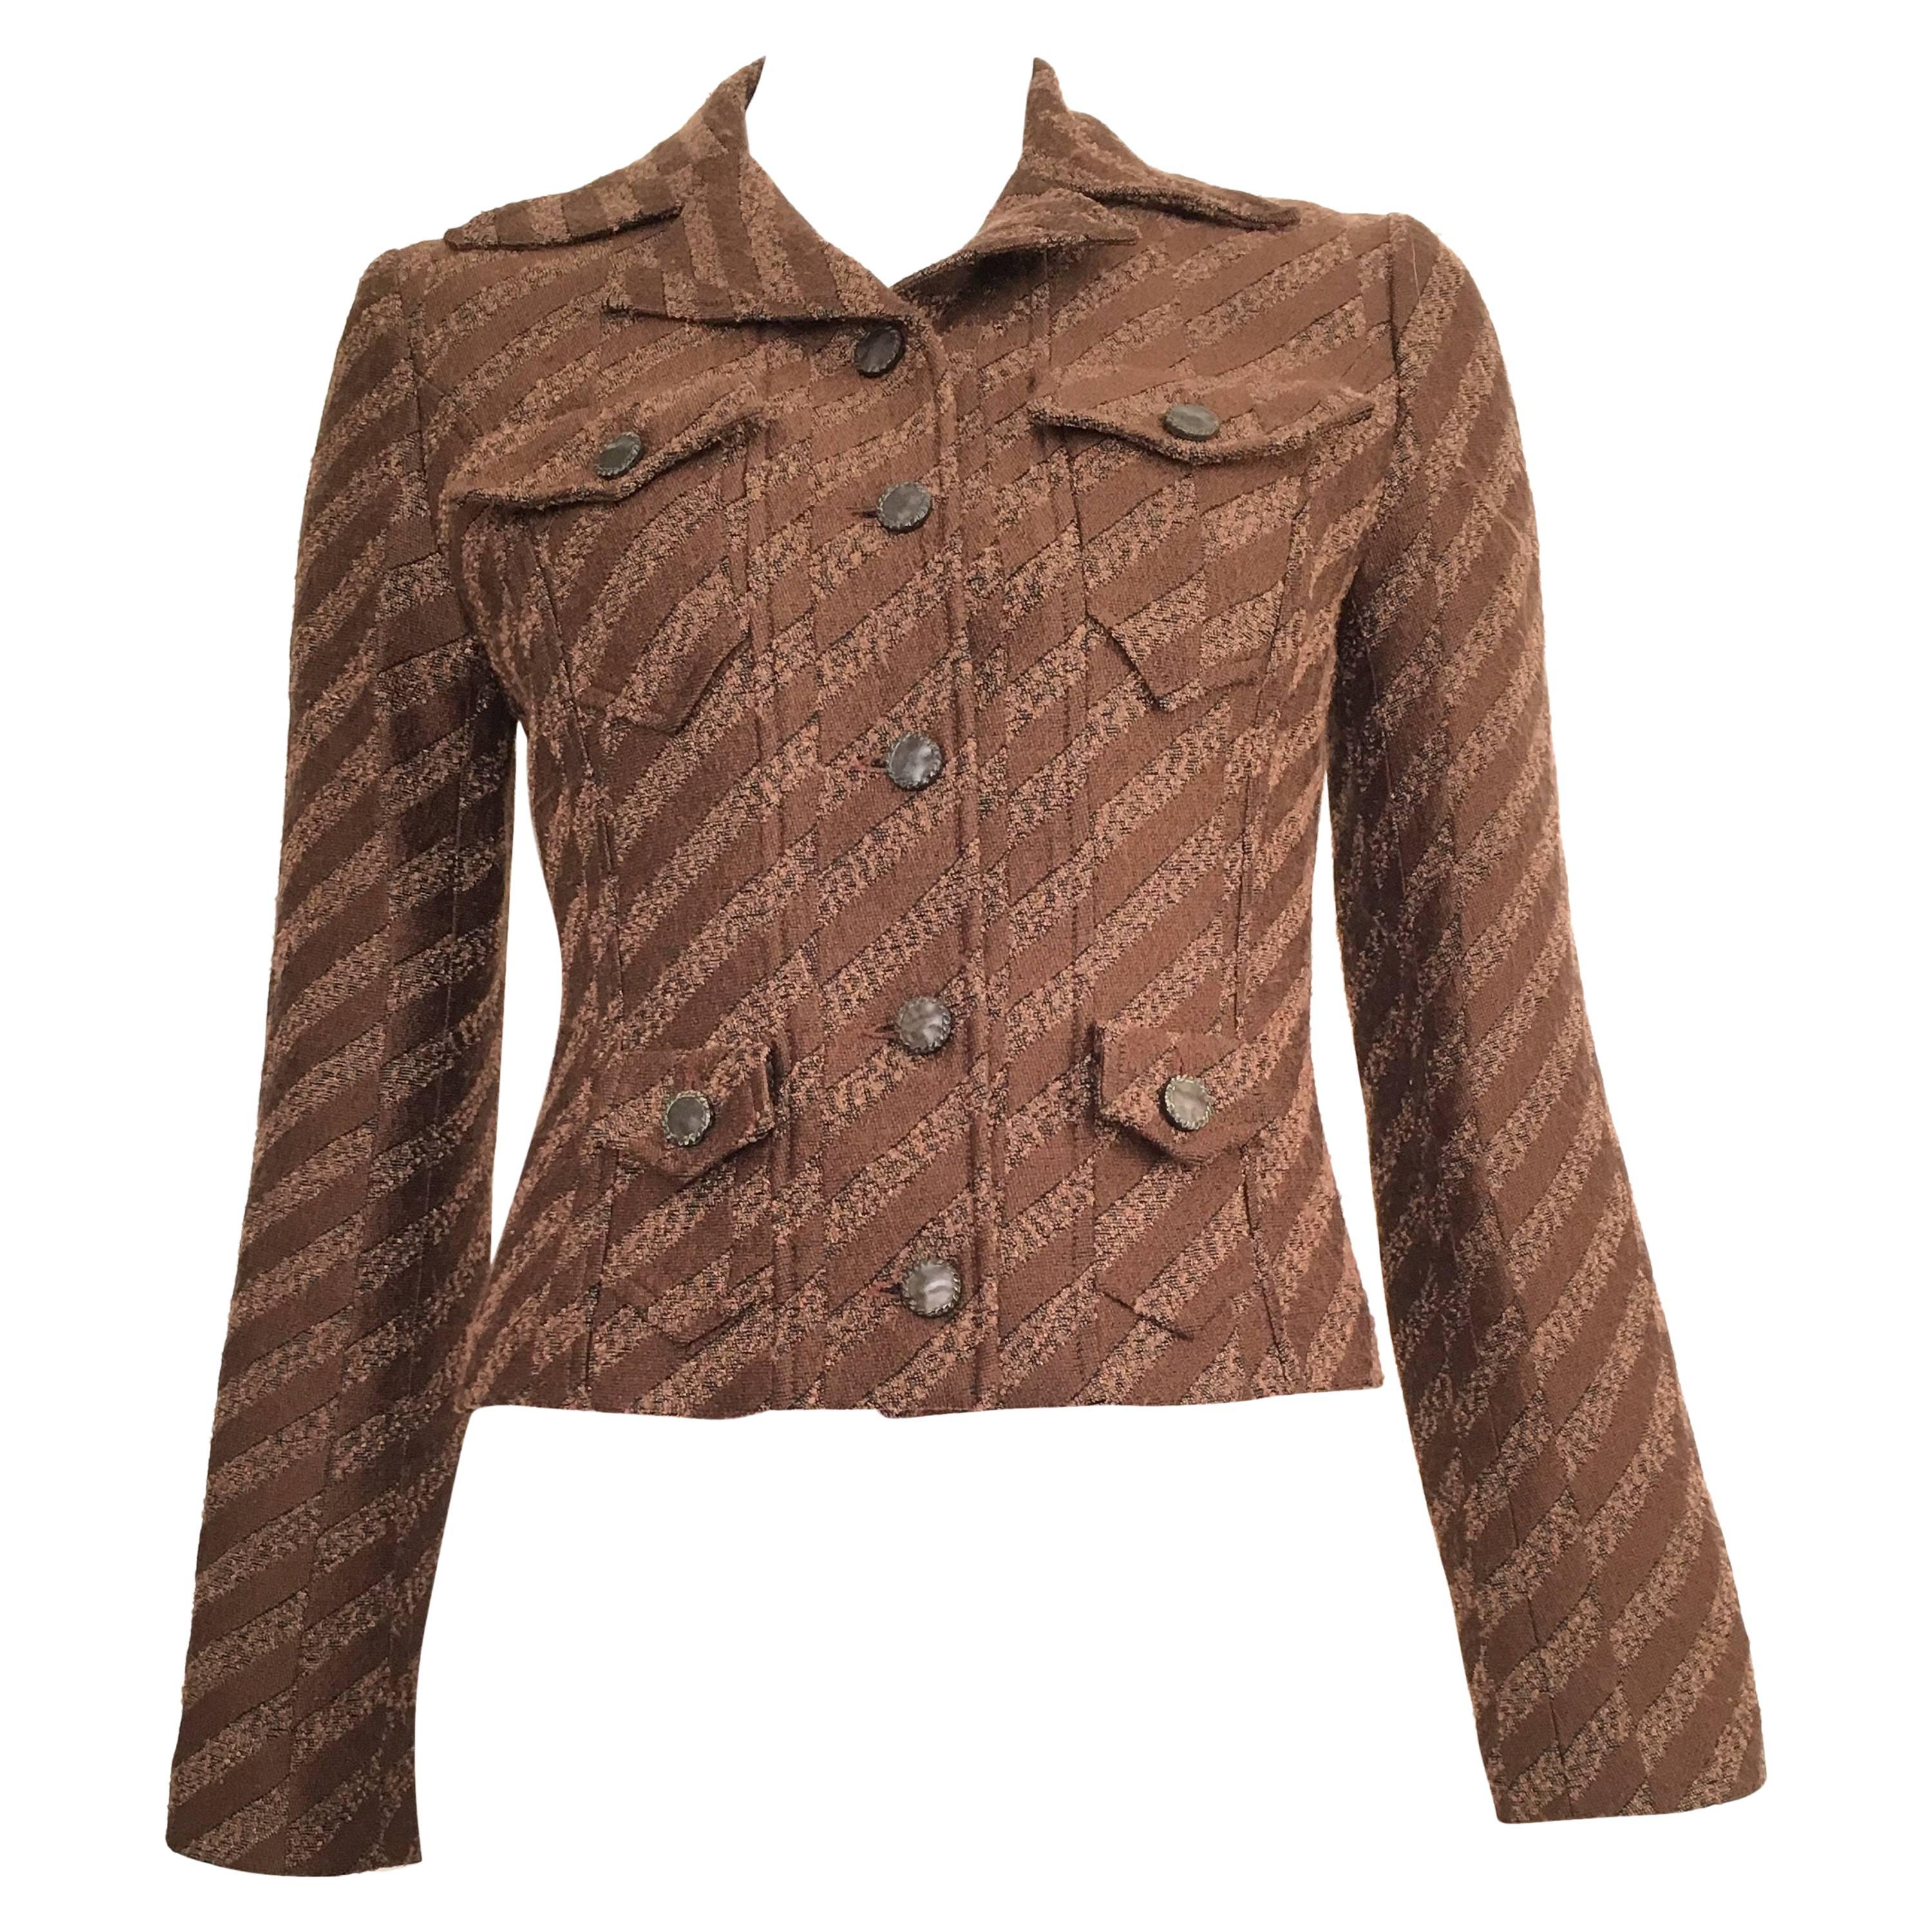 Christian Lacroix Cropped Brown Jacket Size 4. For Sale